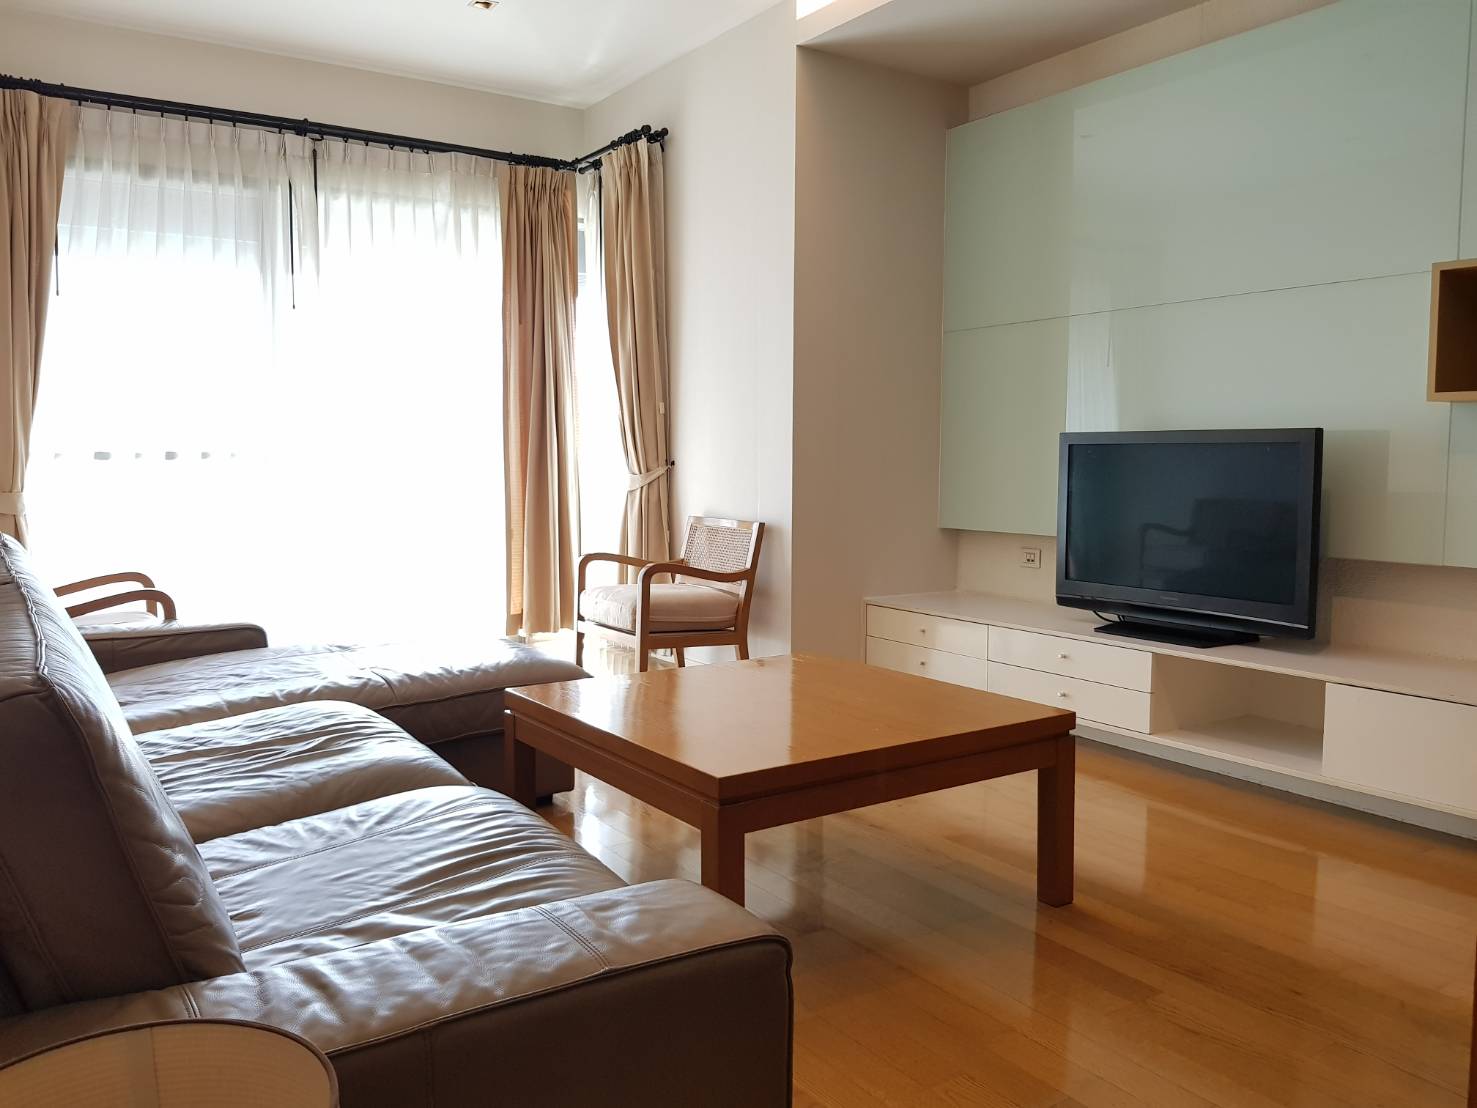 Bangkok Property Condo Apartment House Real Estate For Rent in Phrom Phong Sukhumvit Smooth & Clean Style